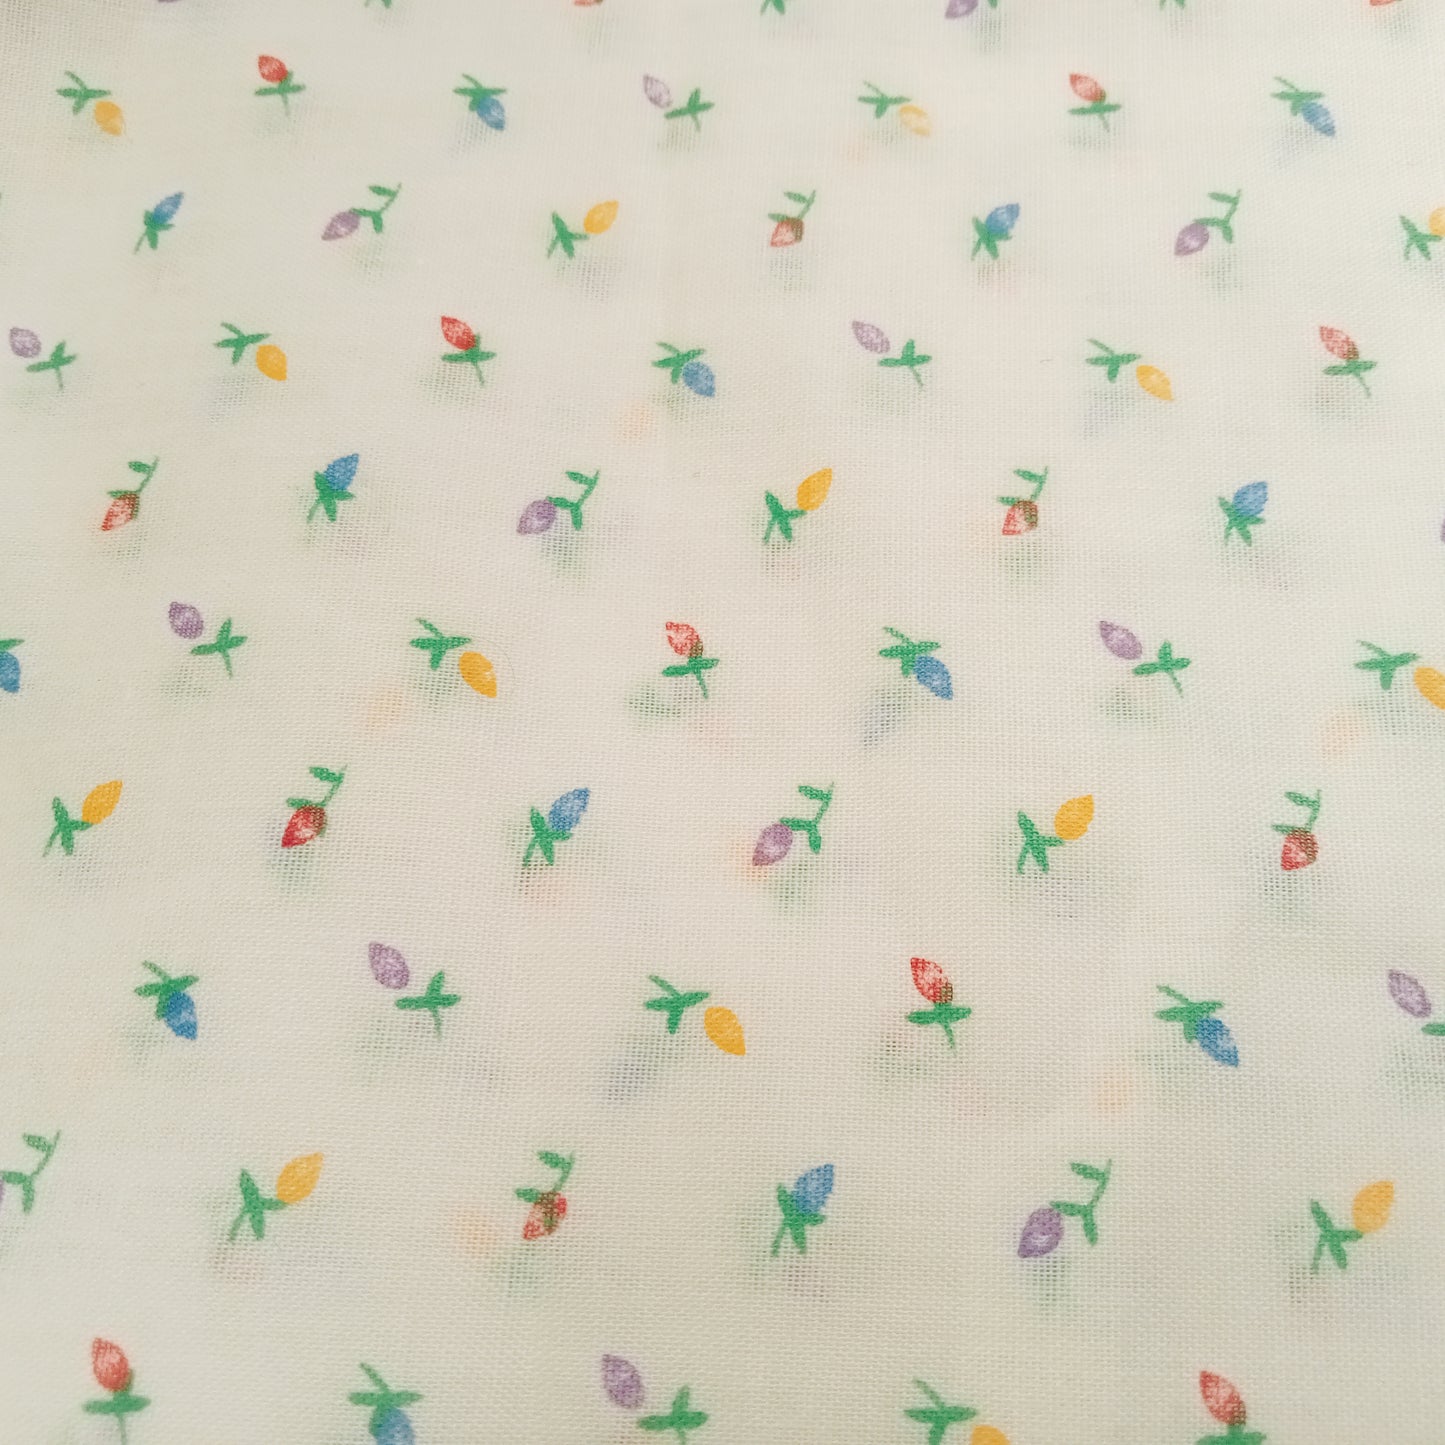 Bulb floral printed cotton fabric - 1.80mtrs